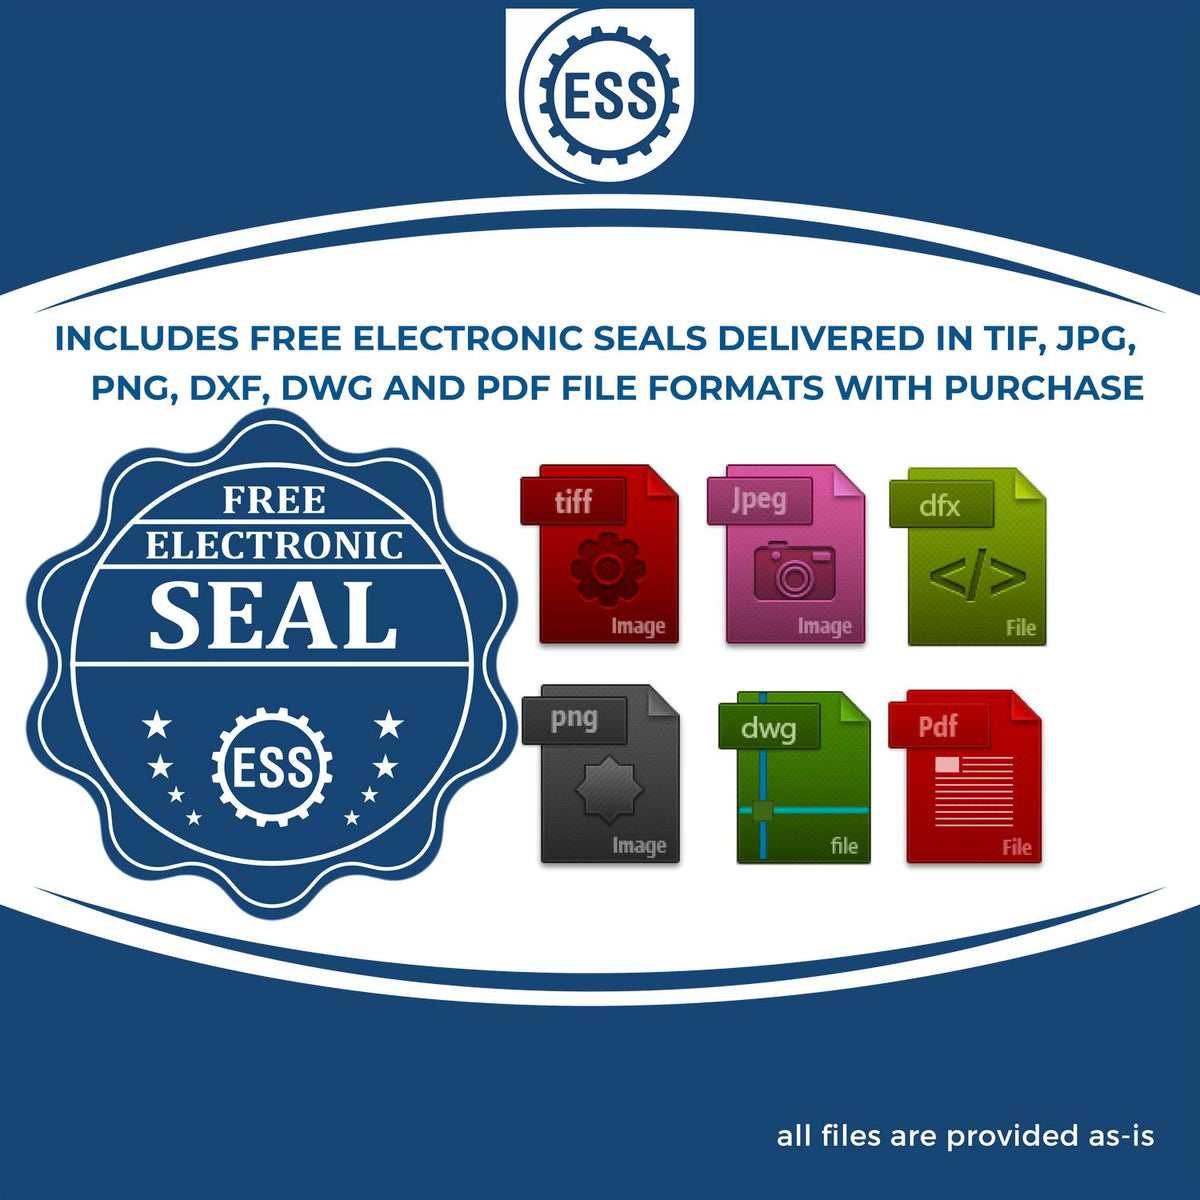 An infographic for the free electronic seal for the Handheld Idaho Land Surveyor Seal illustrating the different file type icons such as DXF, DWG, TIF, JPG and PNG.